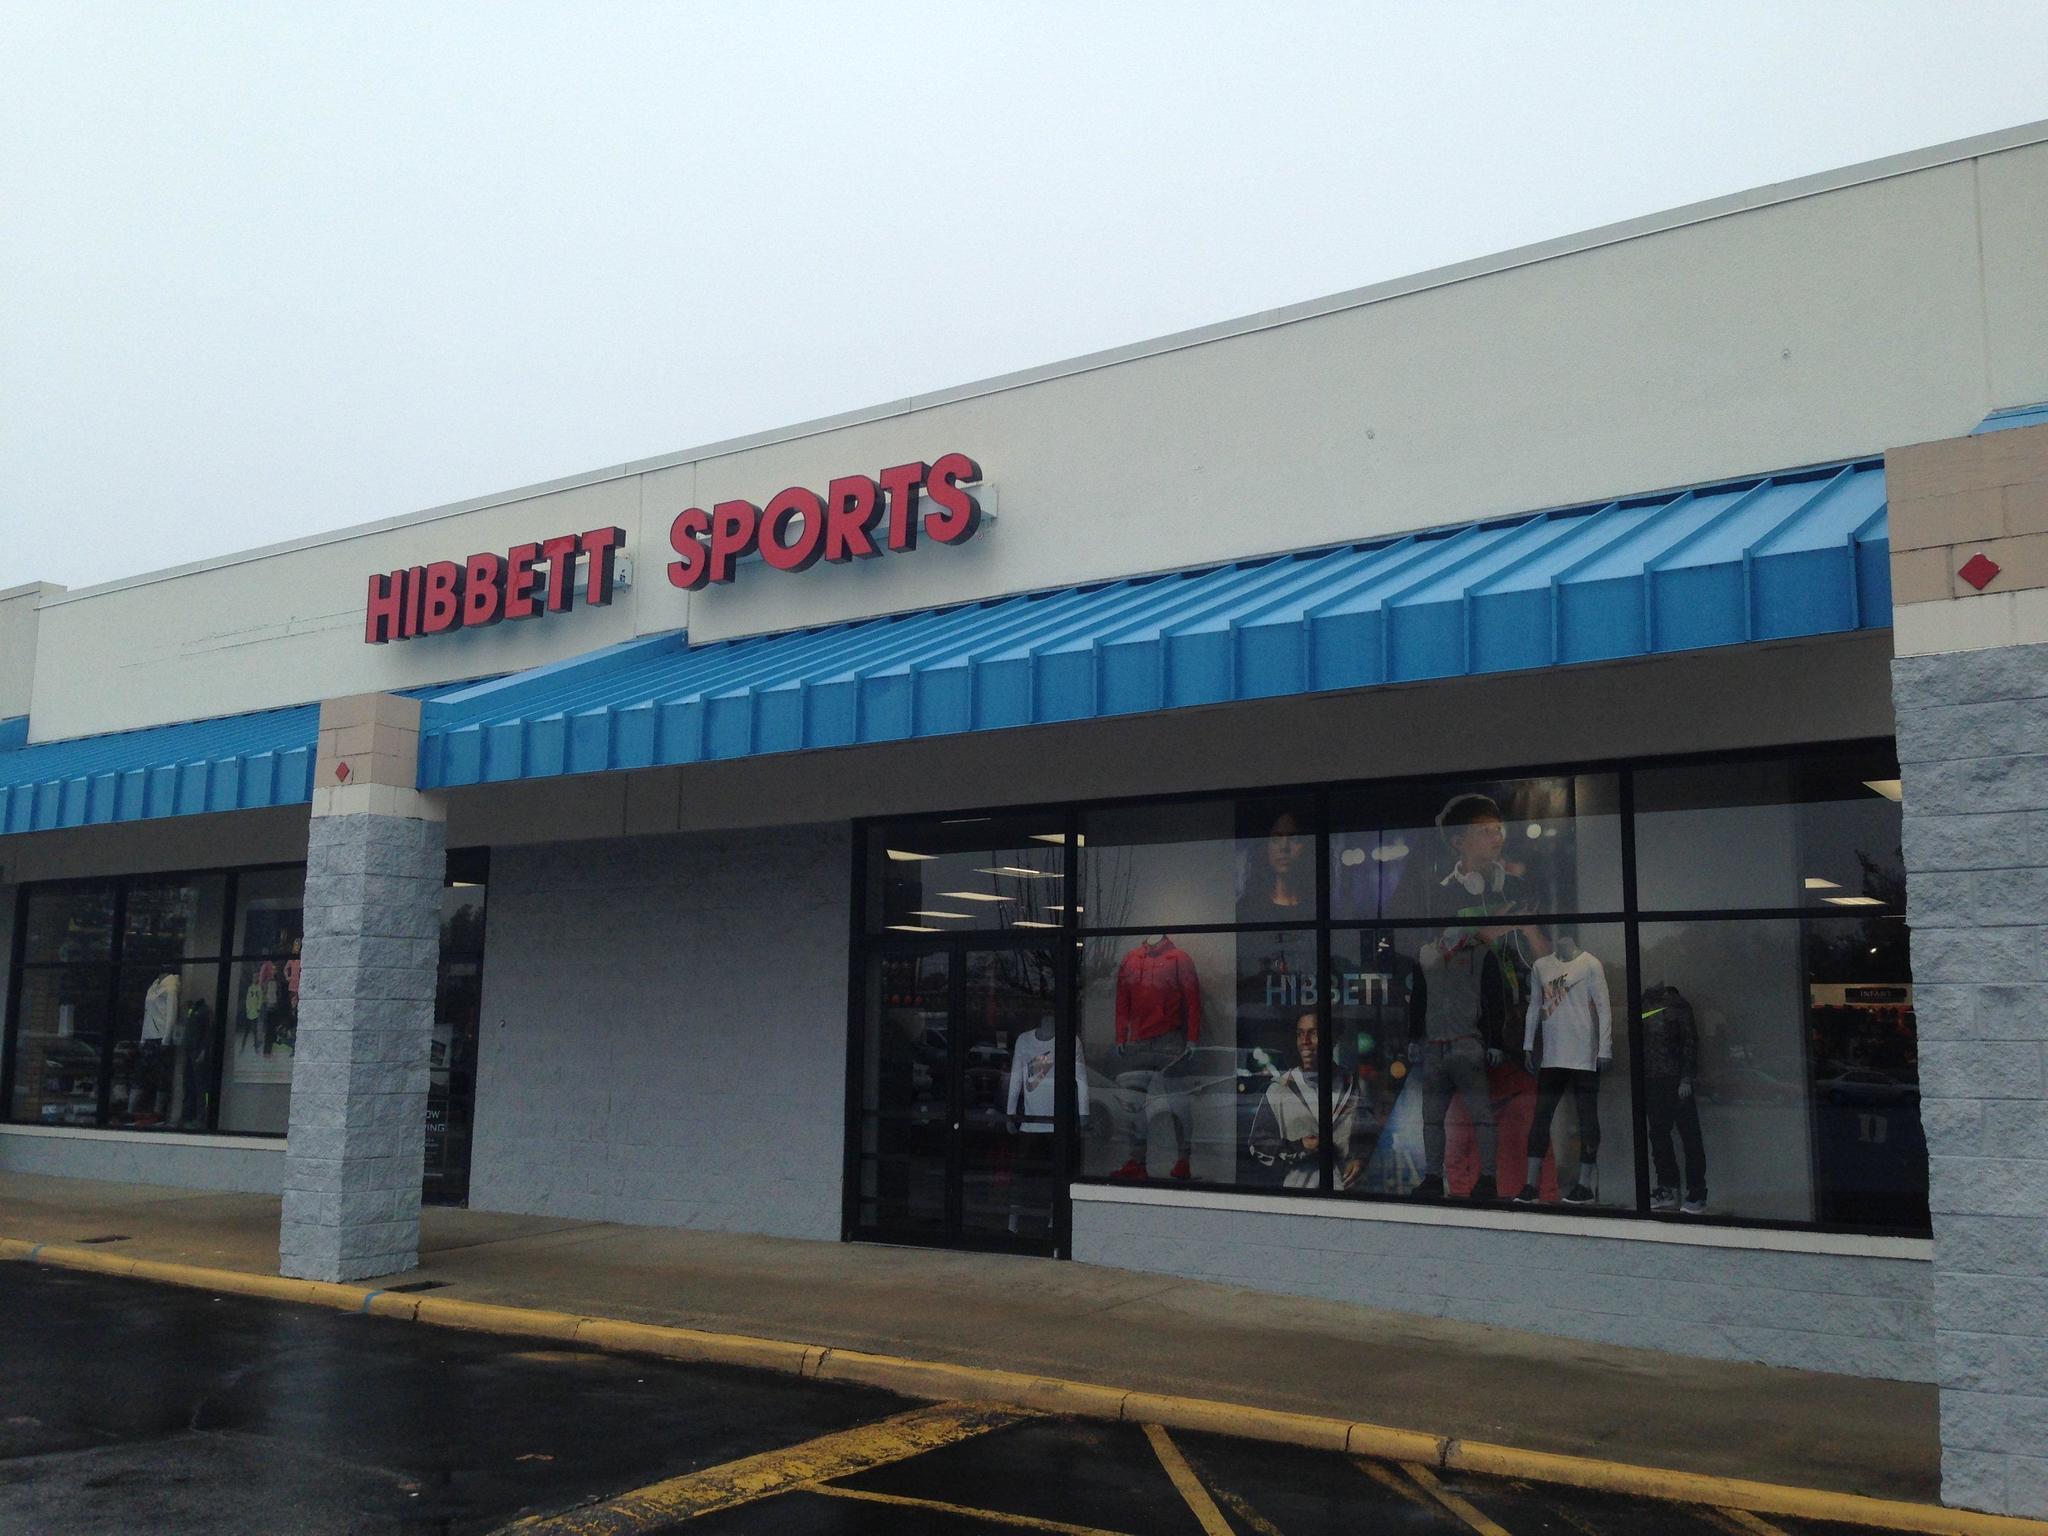 New sporting goods store opens in Gloucester - Daily Press2048 x 1536